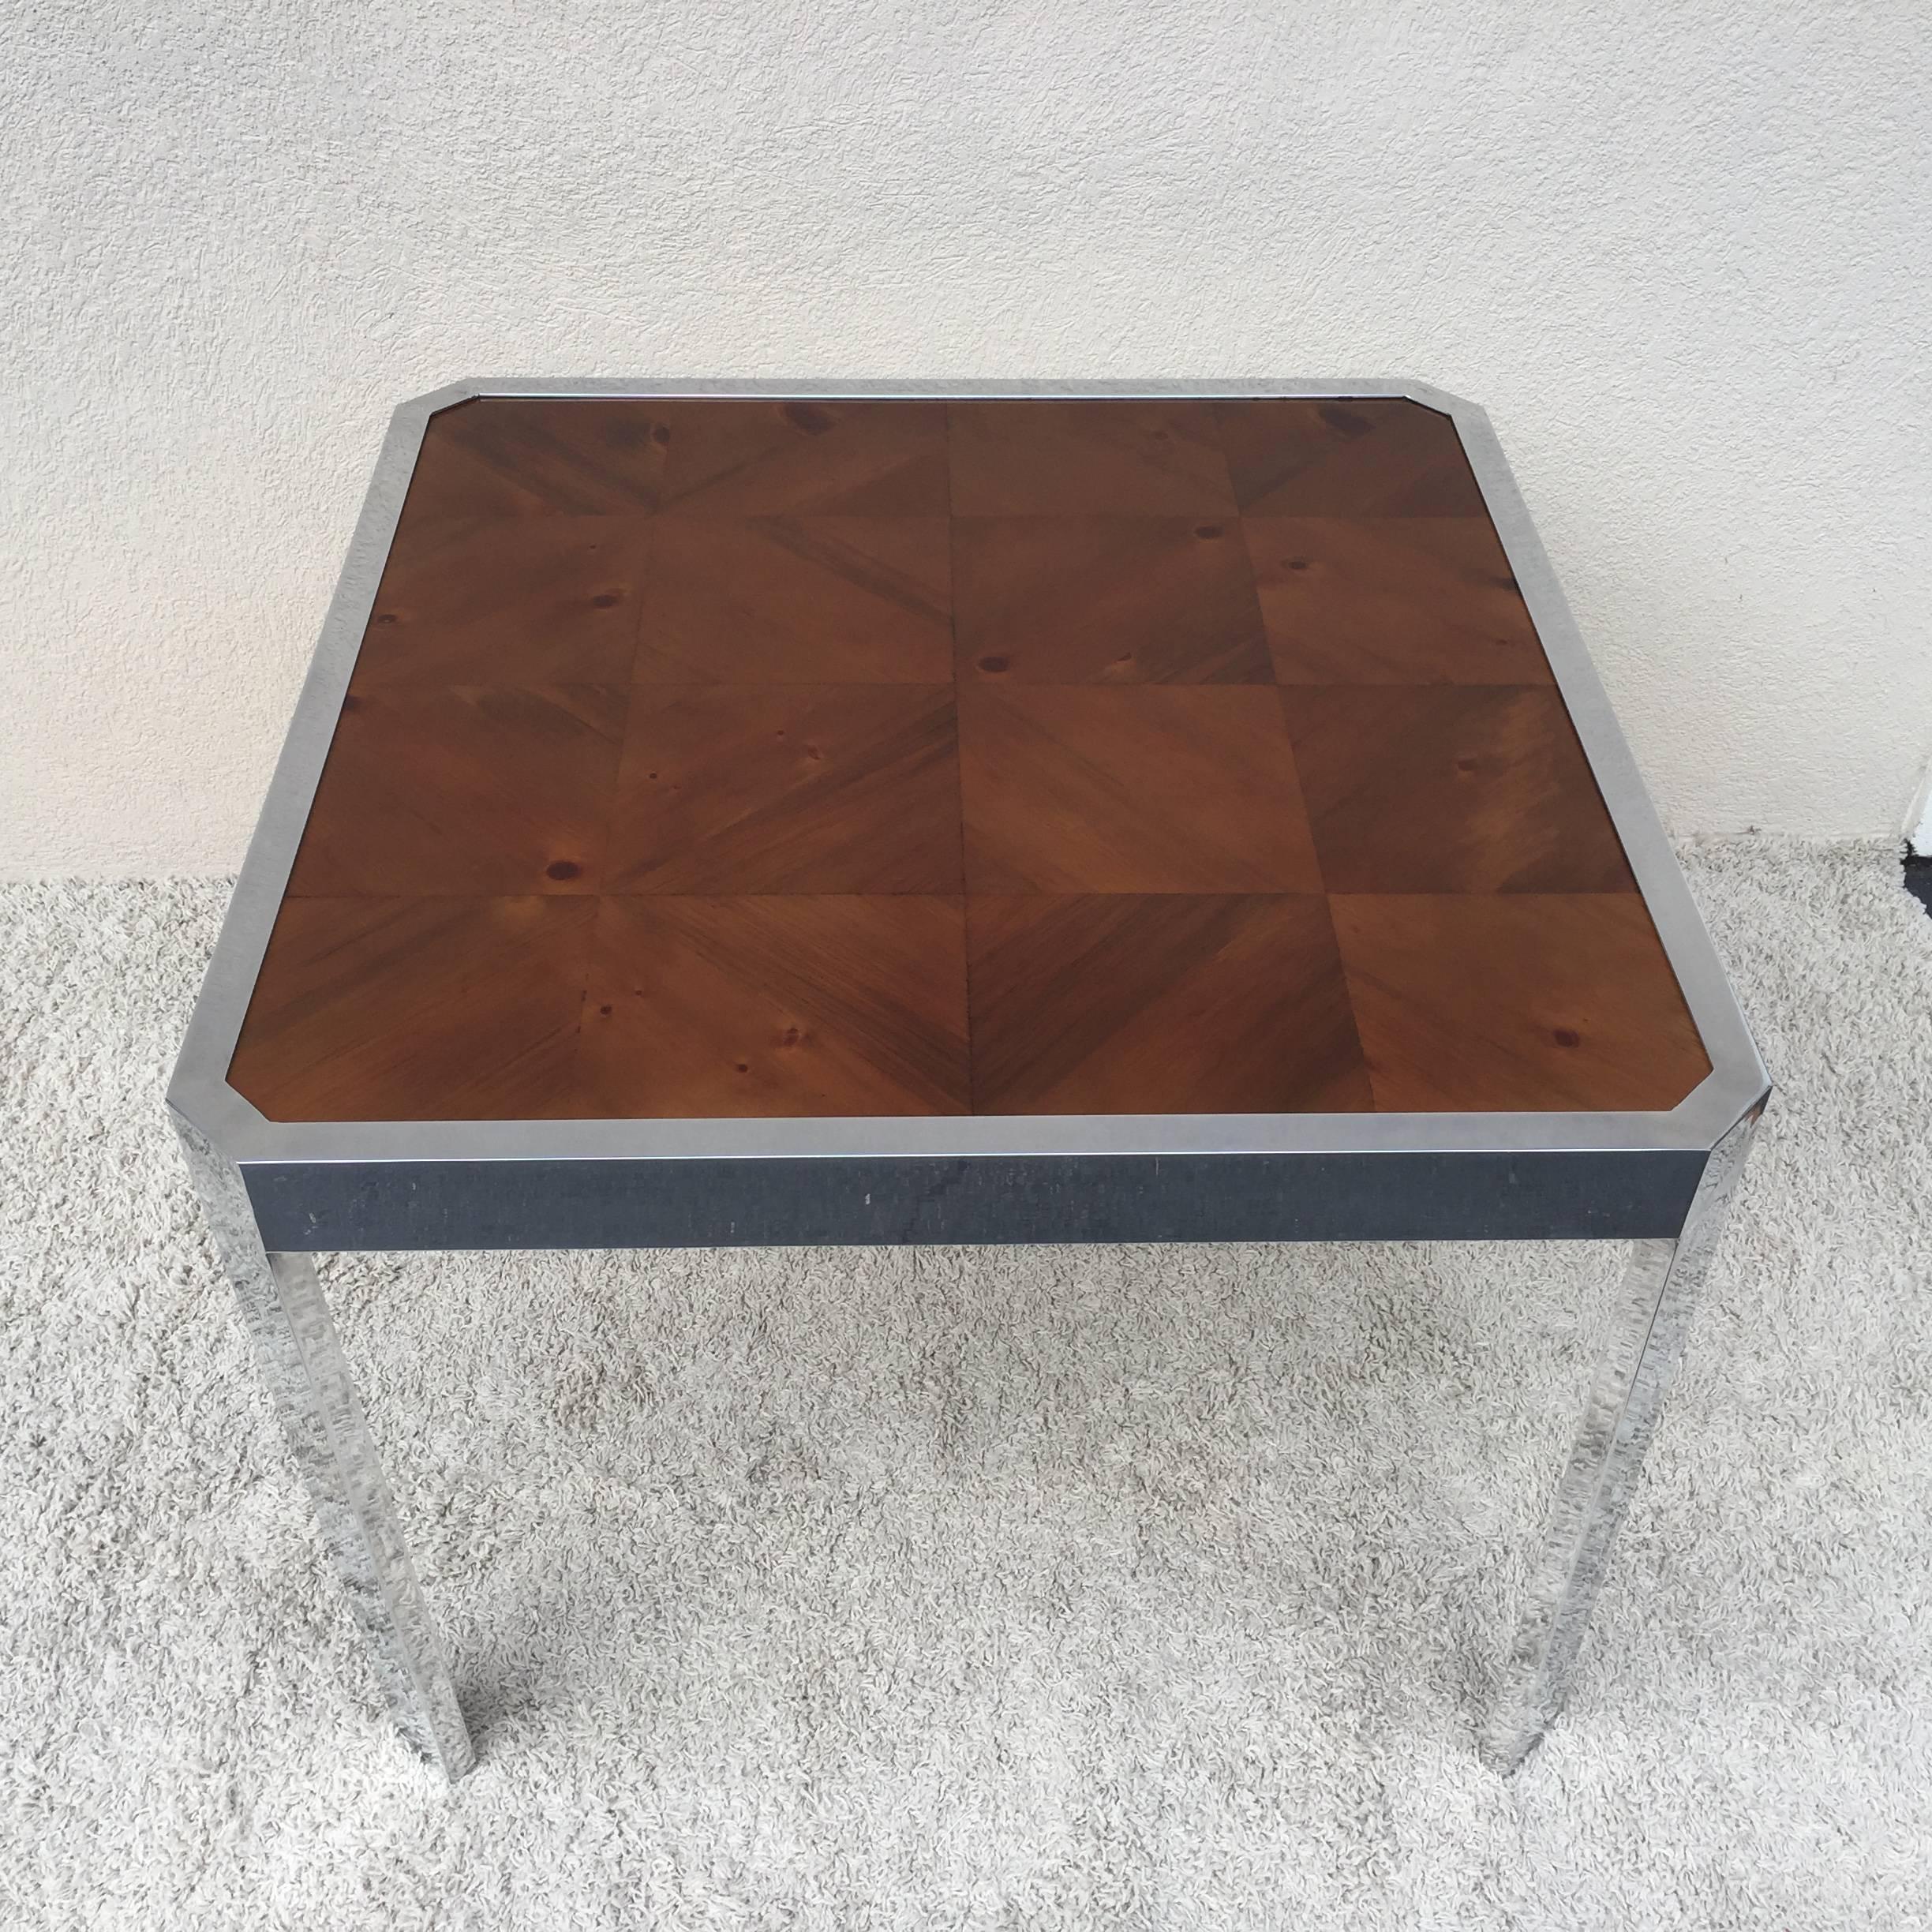 Paul Evans style cityscape polished aluminum parquet top card table small.
Dining table.